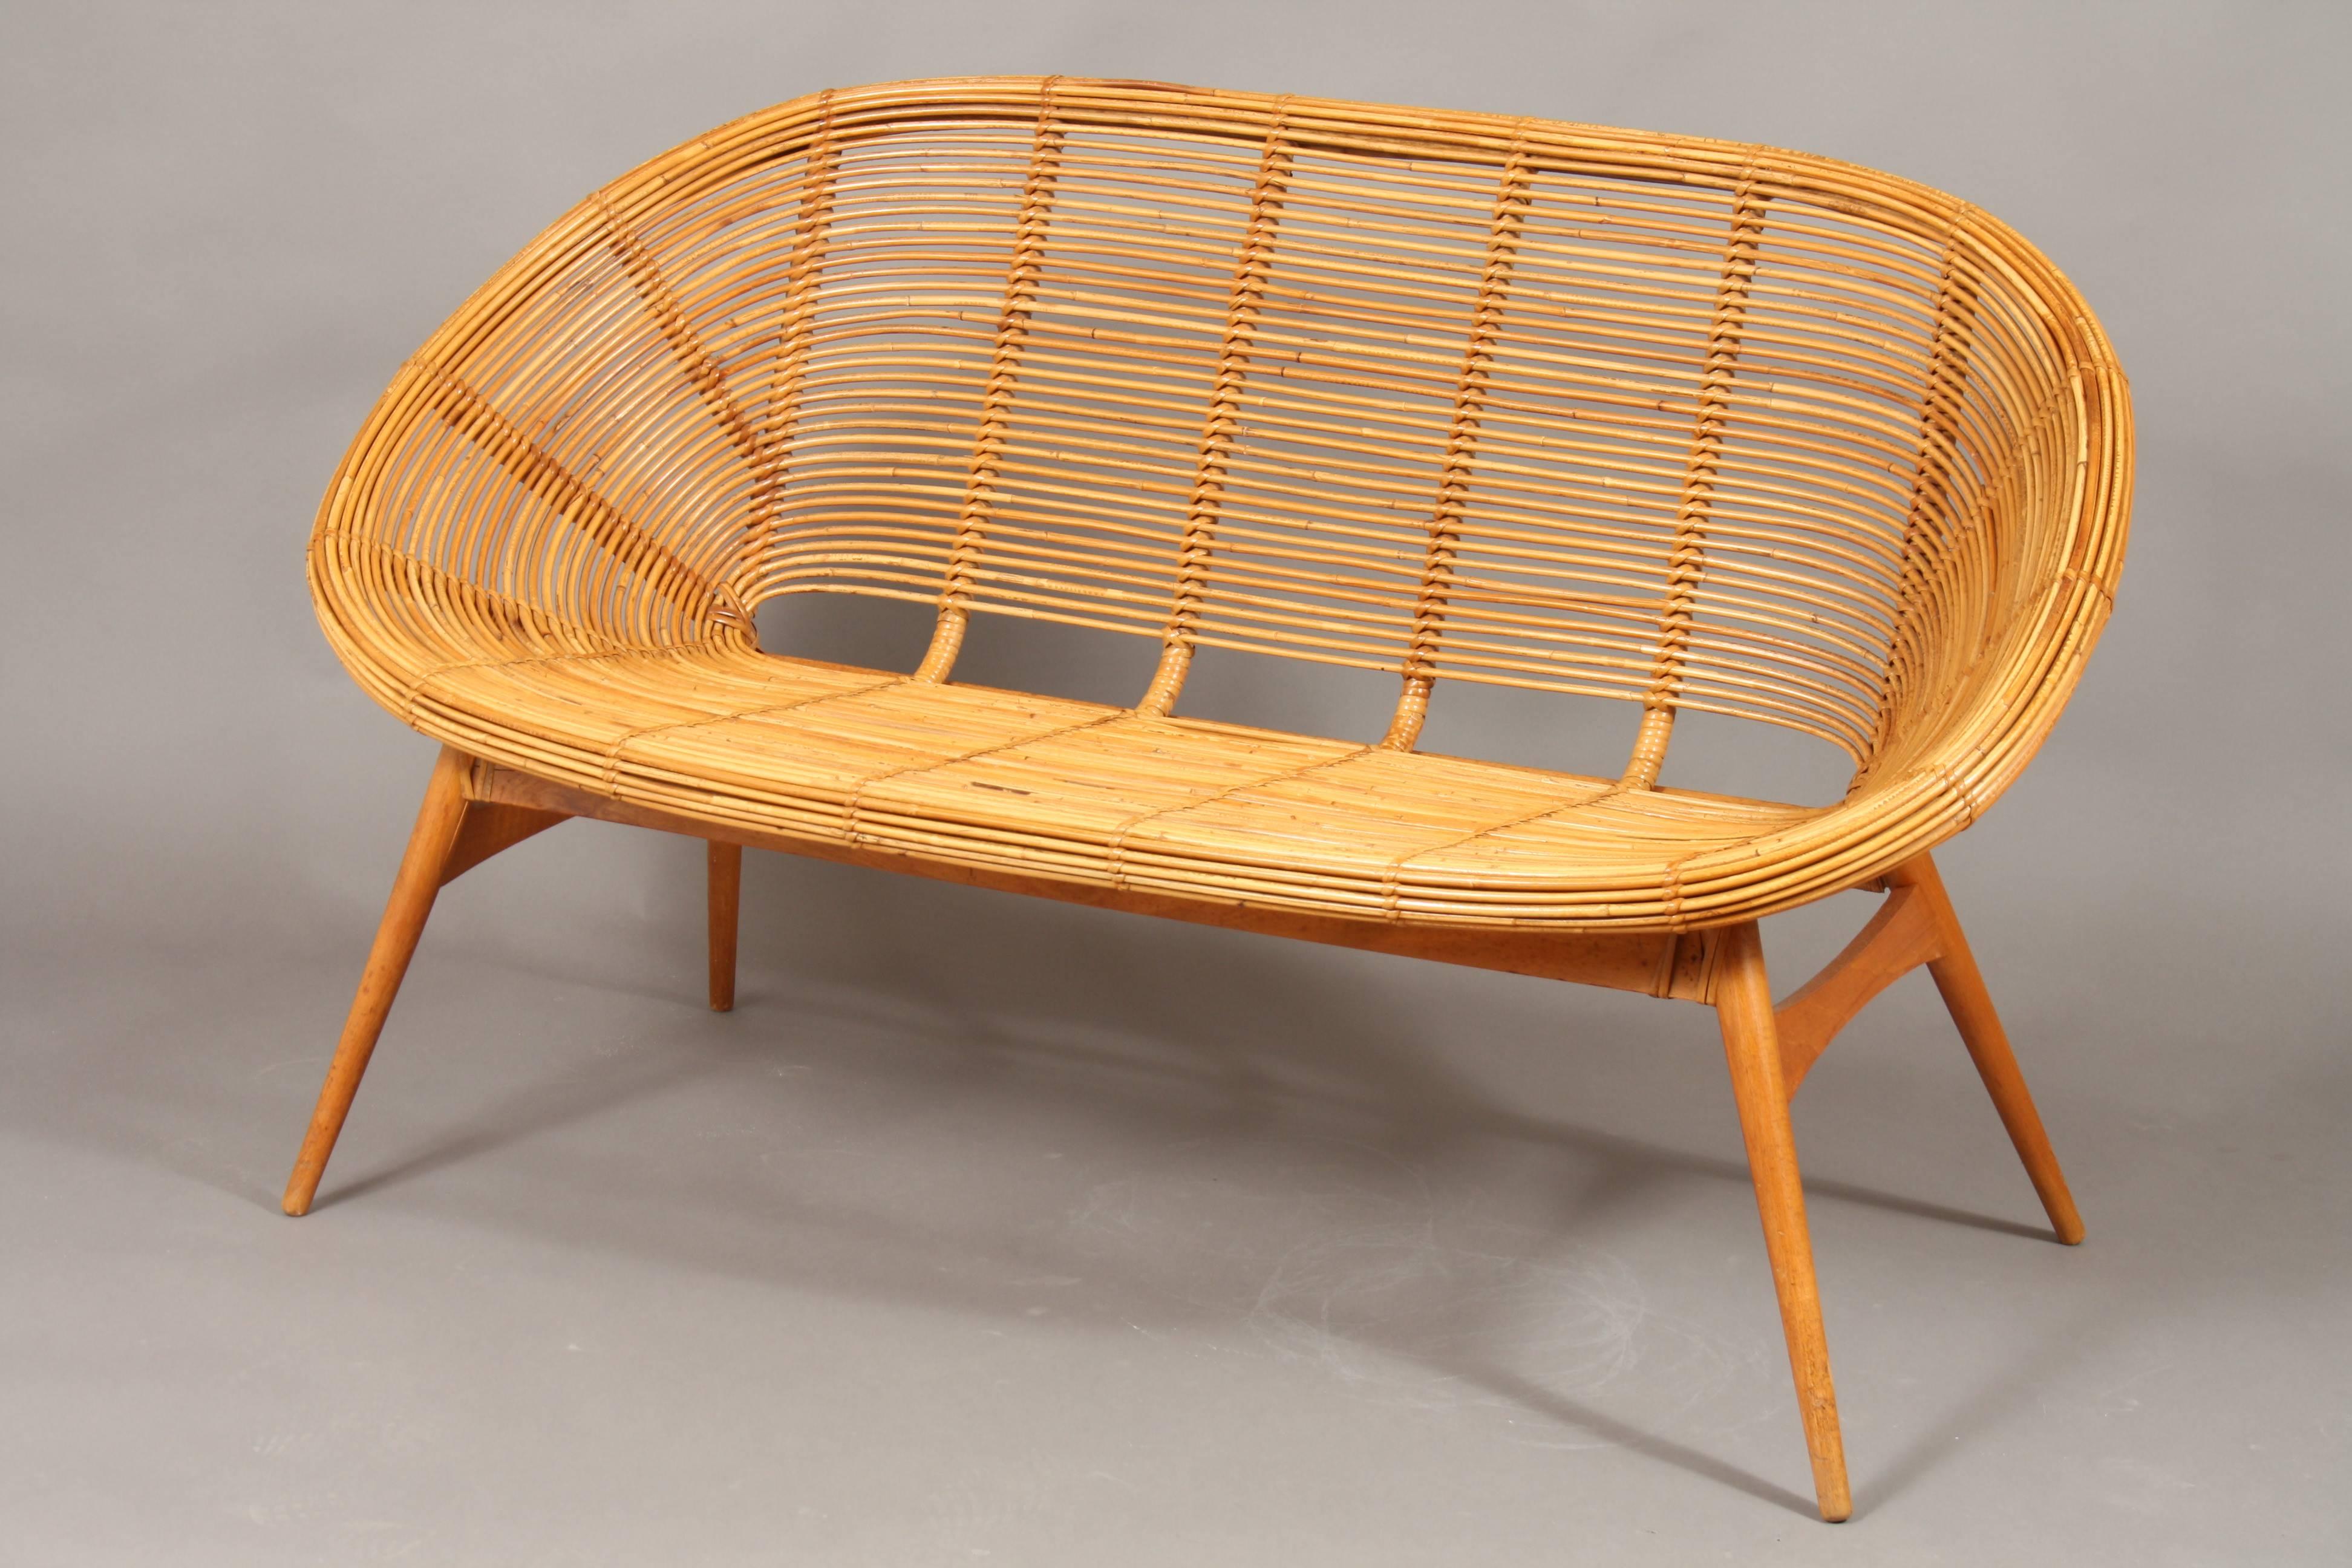 Mid-Century Modern 1960s Wicker Sofa with Teak Frame, Design from DDR